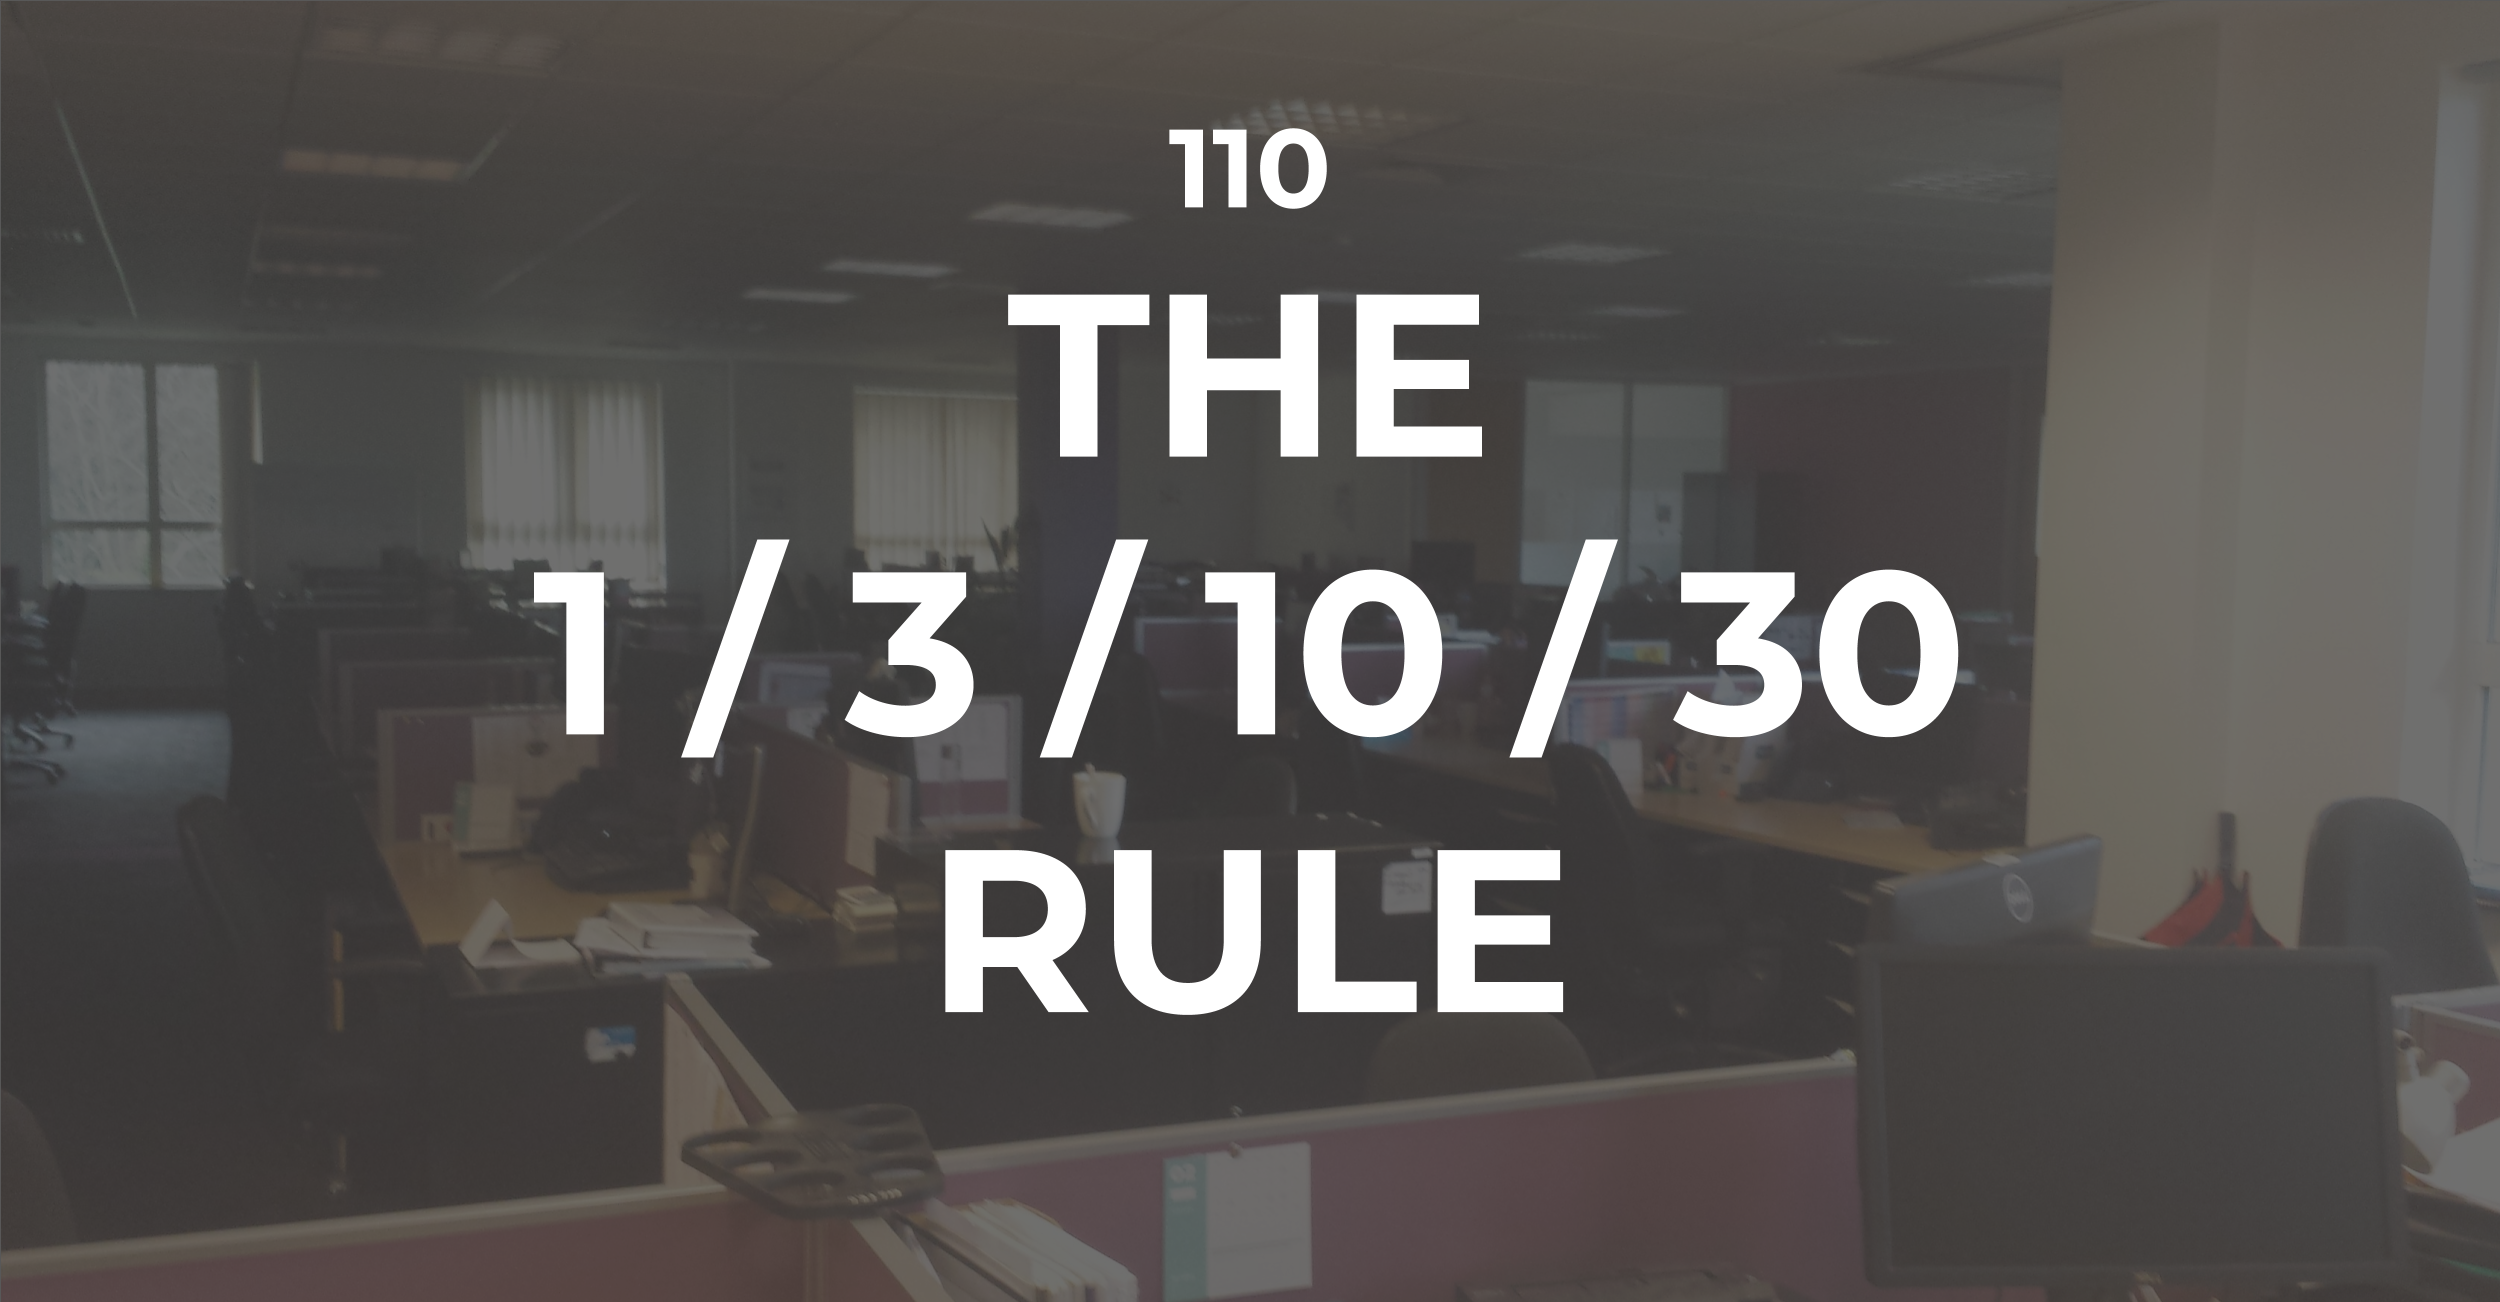 Jay’s 1 / 3 / 10 / 30 rule of scaling a project or organisation